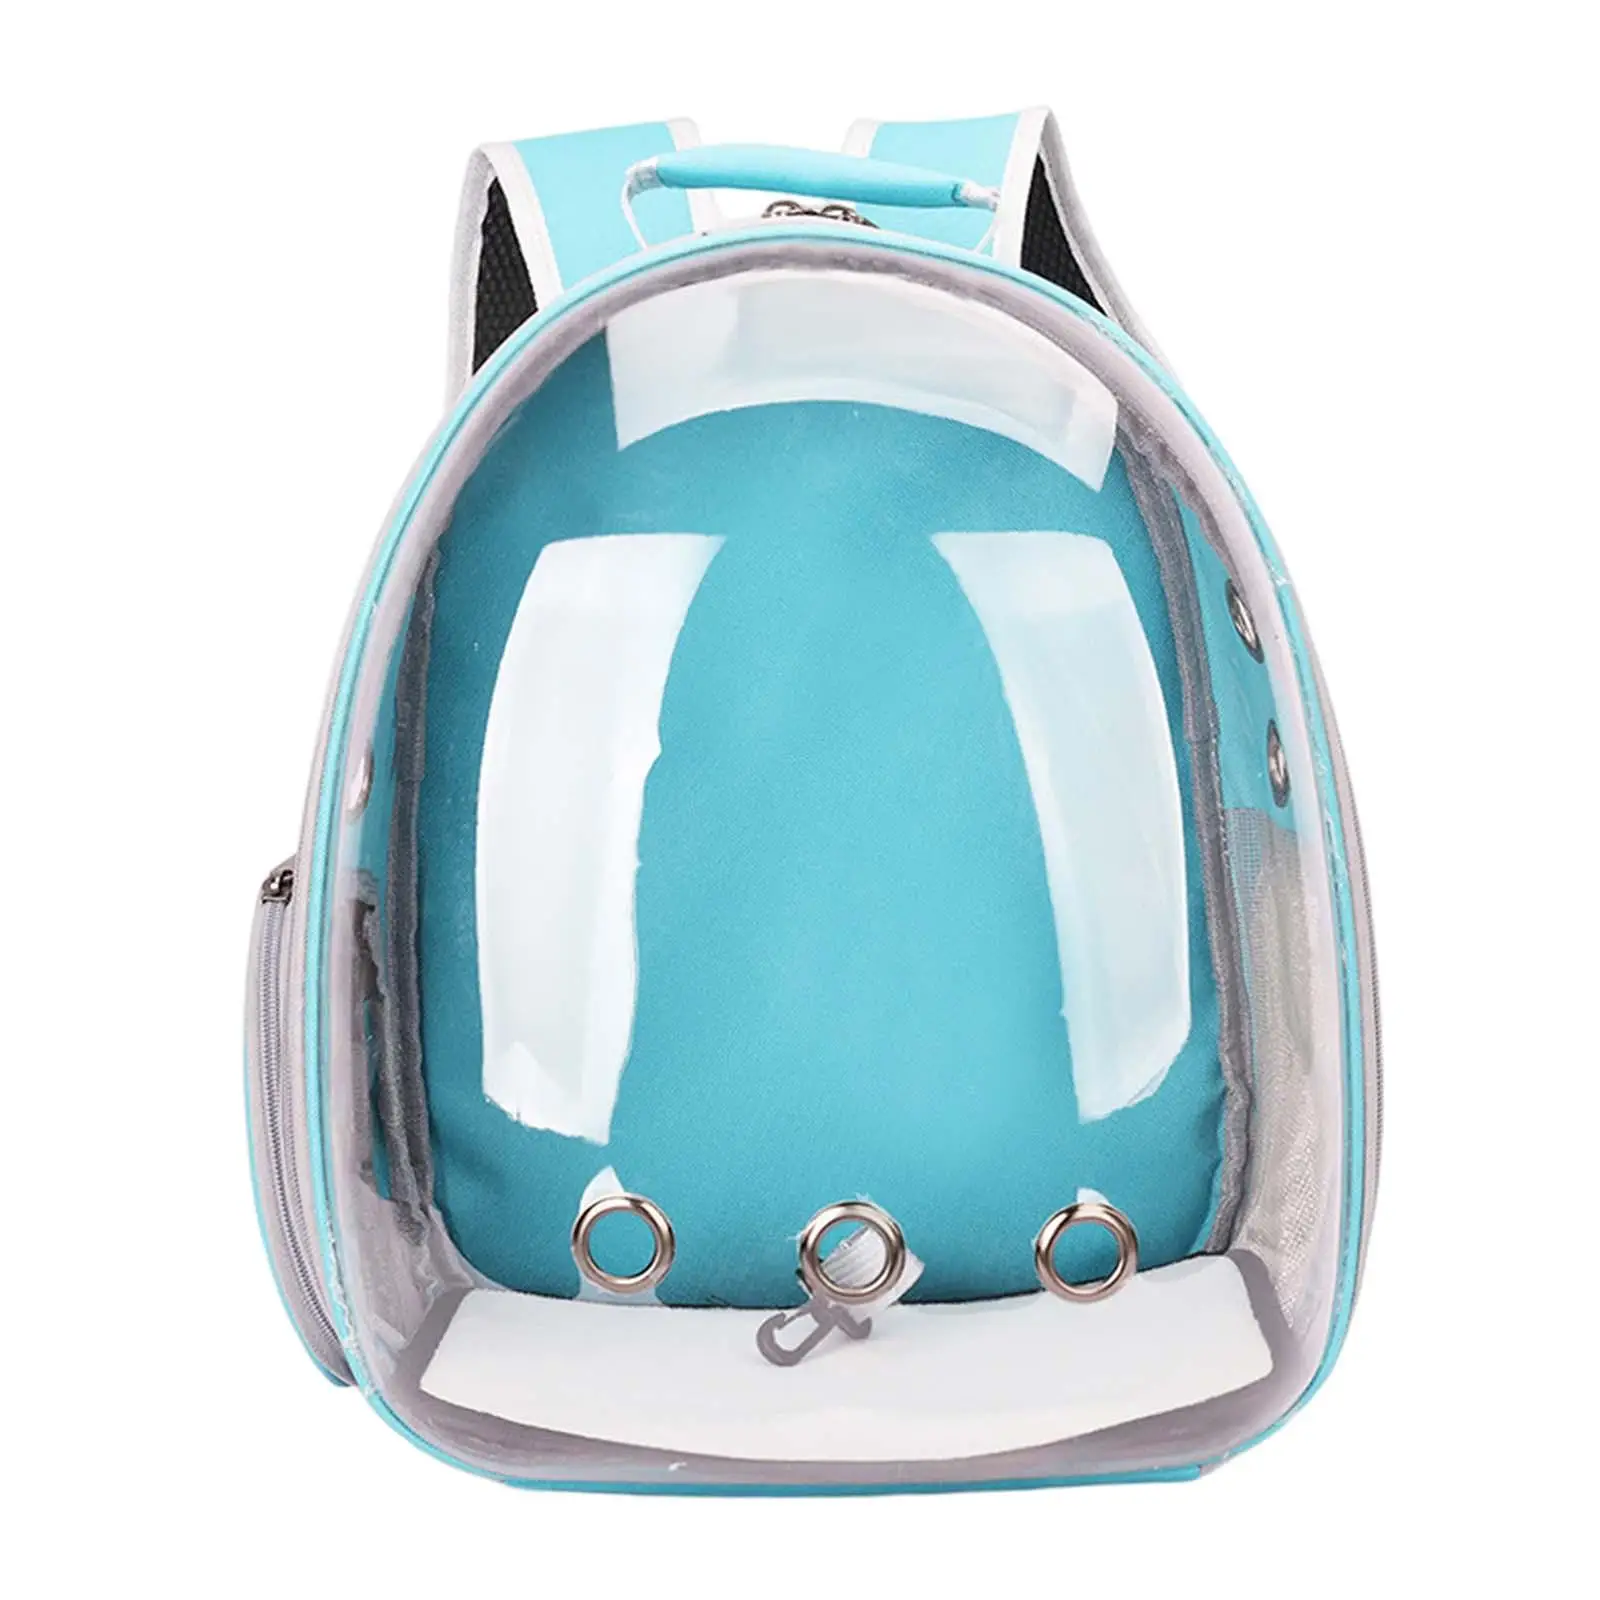 Cat Carrier Backpack Carrying Bag Cage Breathable Tote Small Dogs Cats Travel Carrier for Walking Camping Outdoor Use Traveling